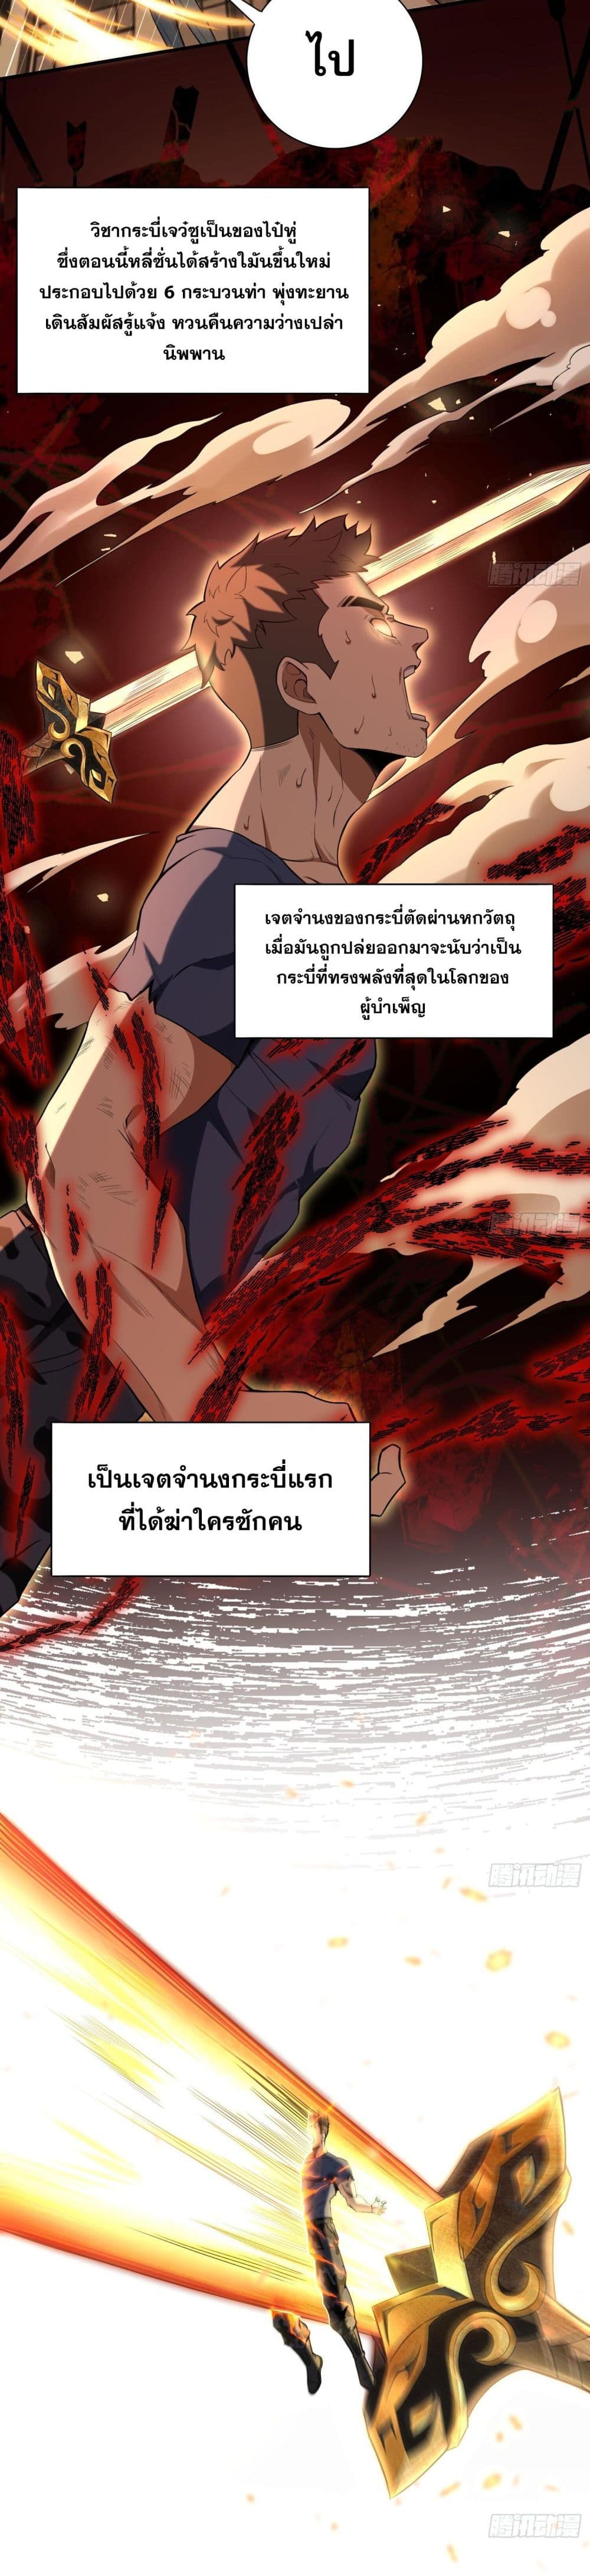 The All-Knowing Cultivator ผู้ฝึกตนผู้รอบรู้ 17/21